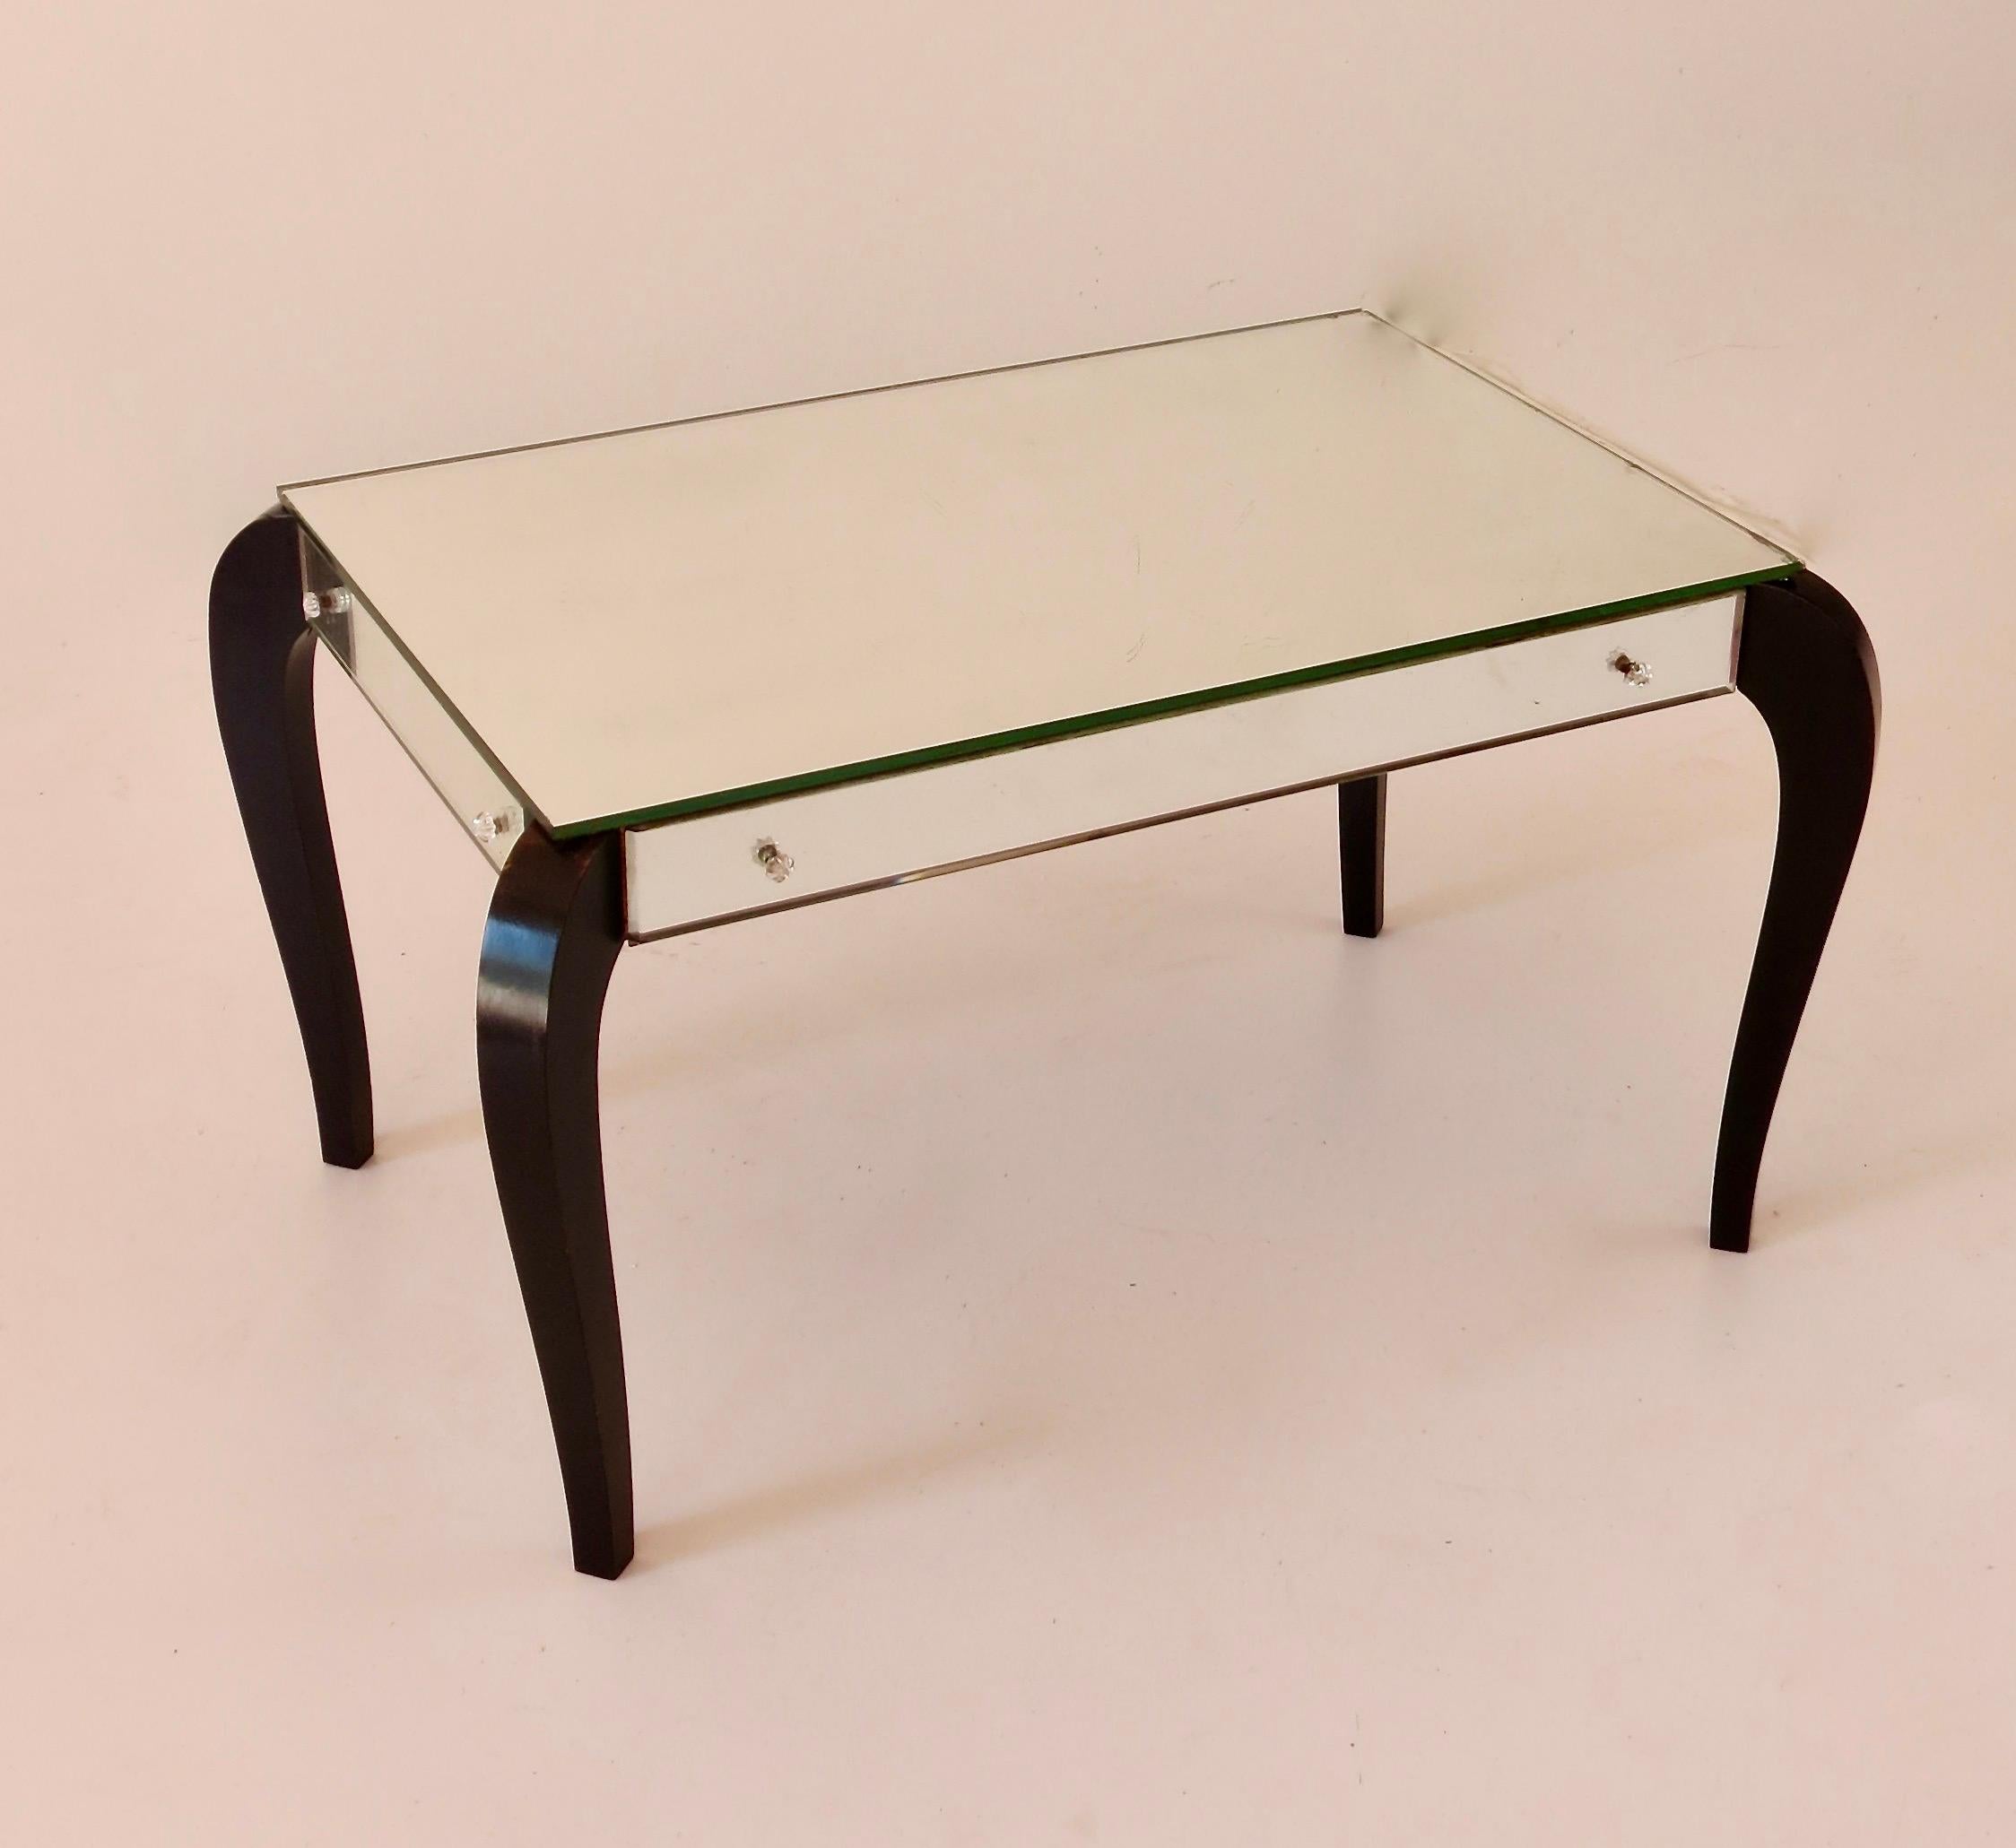 Extremely rare occasional coffee table, circa 1935
mirrored glass, ebonized wood, seven little glass screw cover (one missing)
all original condition
in the style of Fontana Arte (see Phillips Design Auction New York 11/06/2014 lot 67 for related